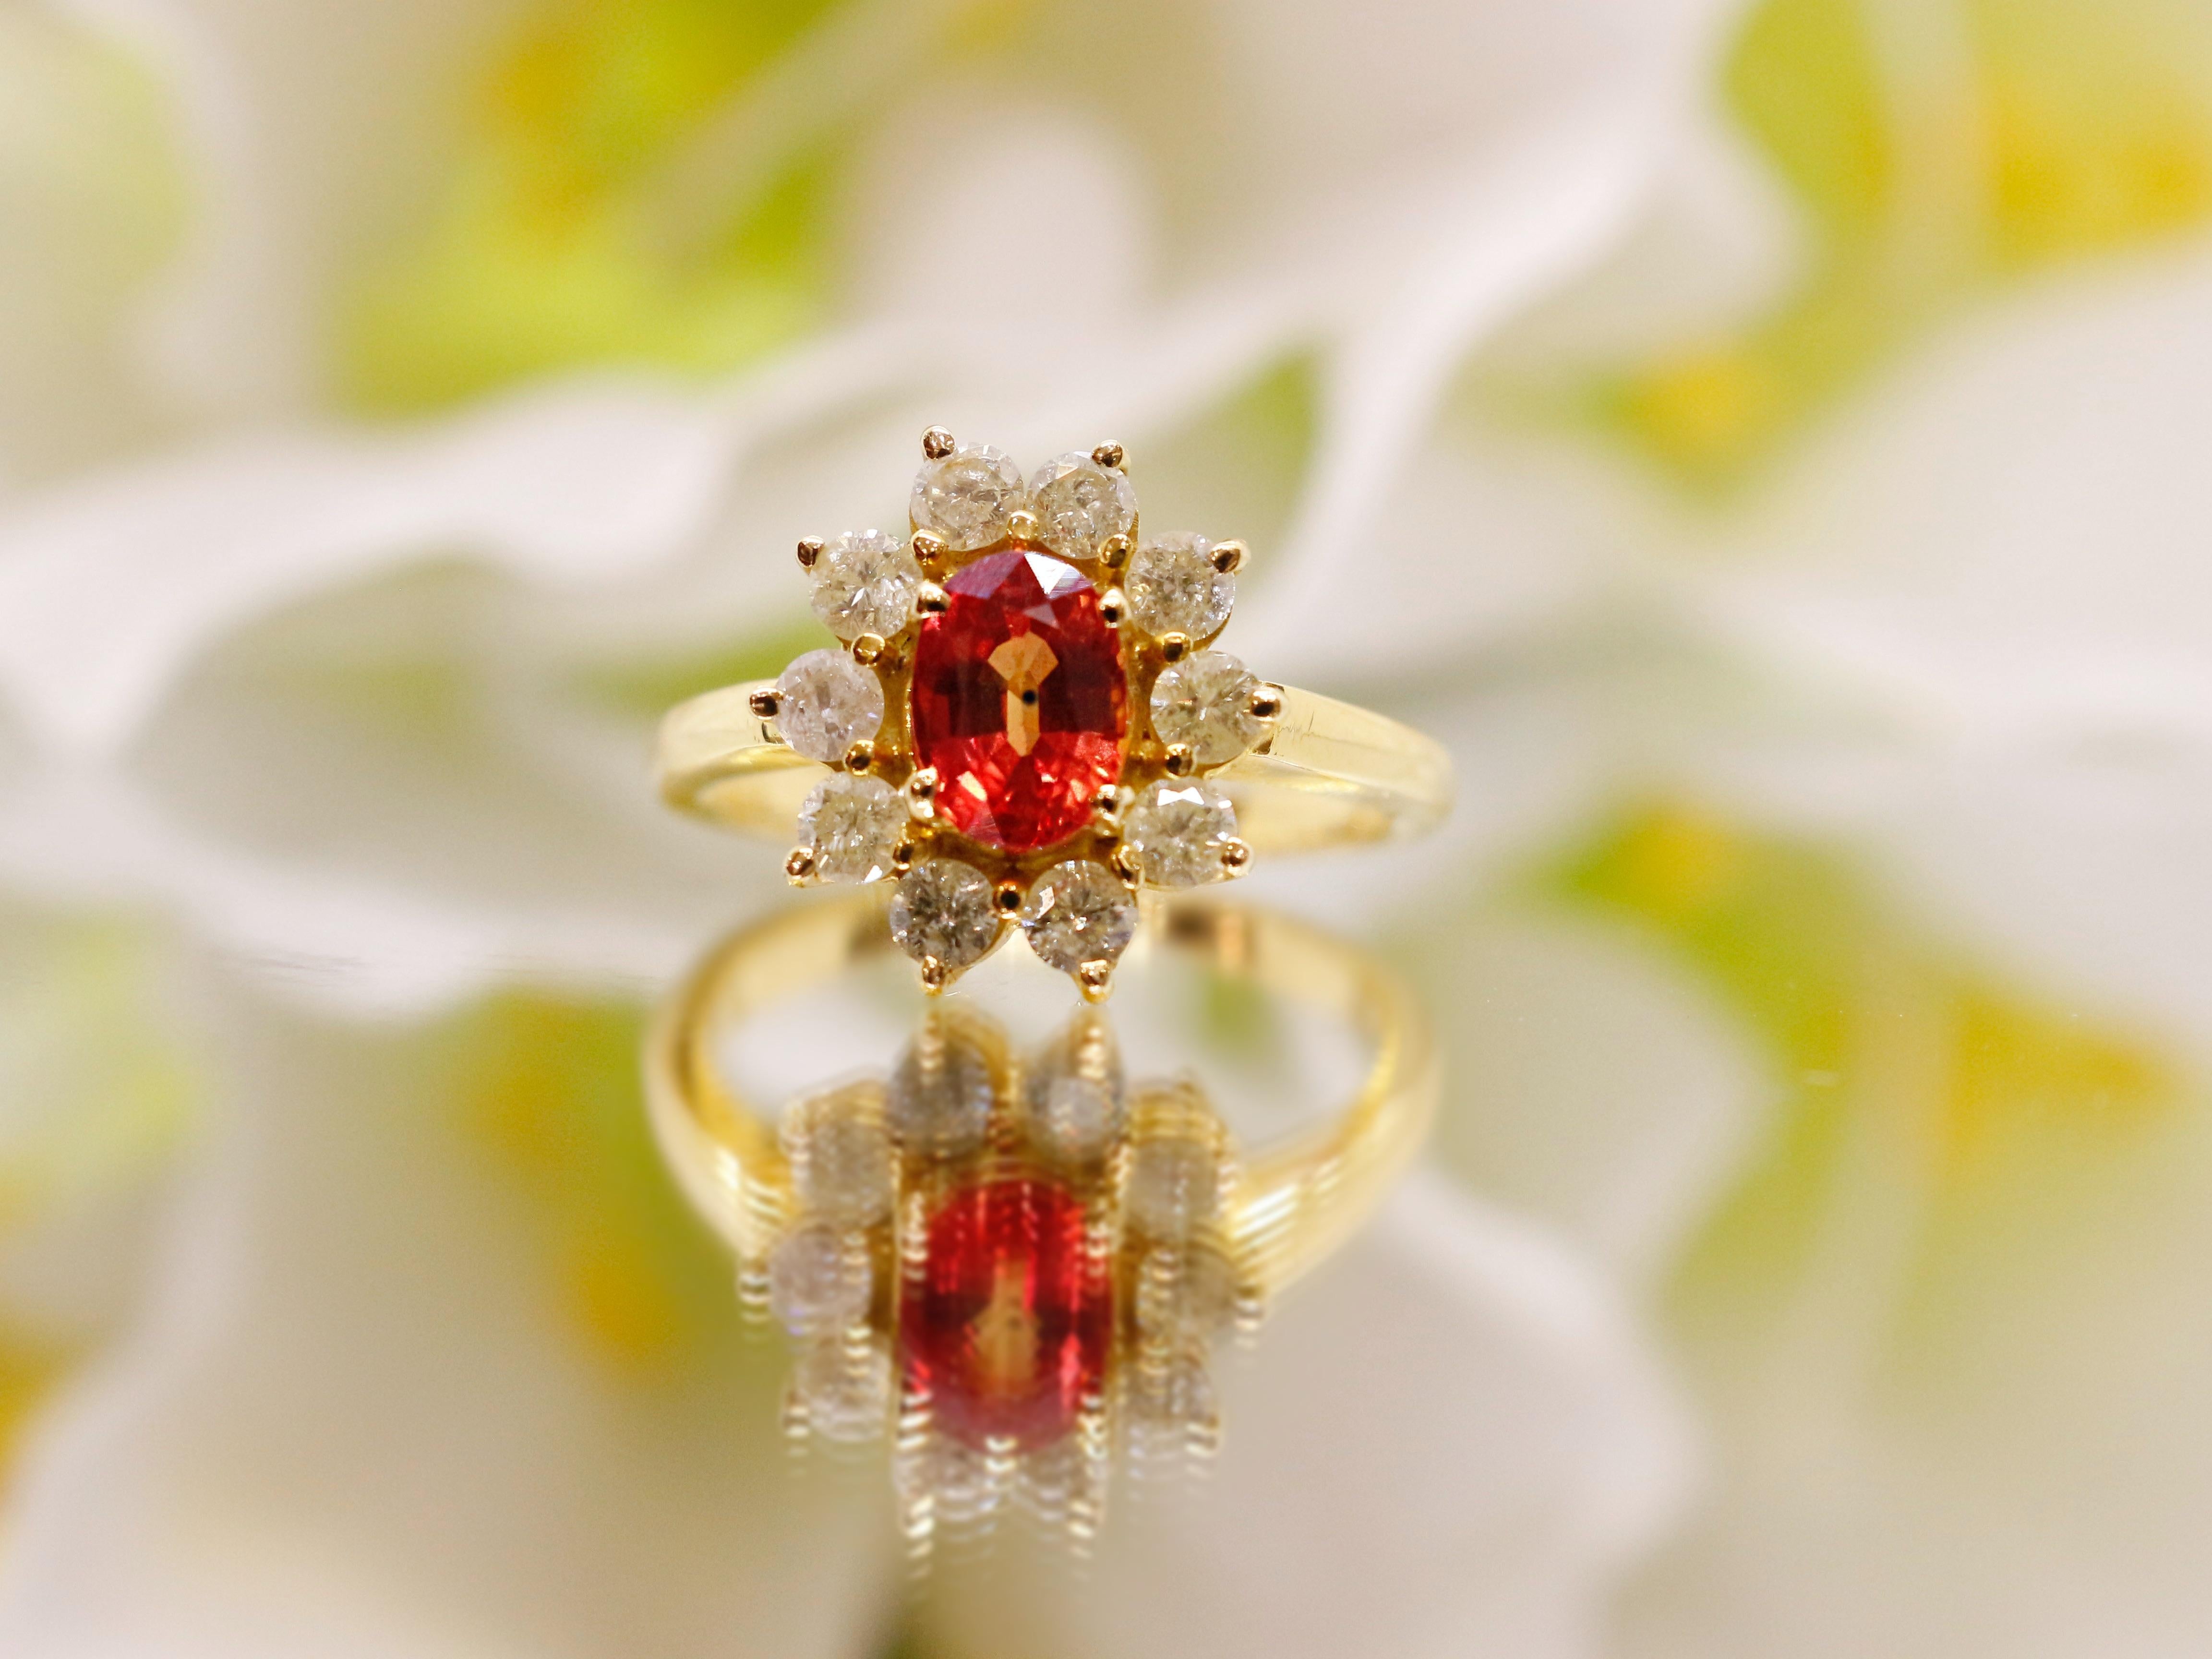 ◆Detail description◆

◆Solid 18kt Gold (shown in picture)

◆Ruby Weight: 2 CT

◆Diamond Carat: 0.15 CT

◆Diamond Shape: Round mixed

◆Total Weight: 5.3 Gram